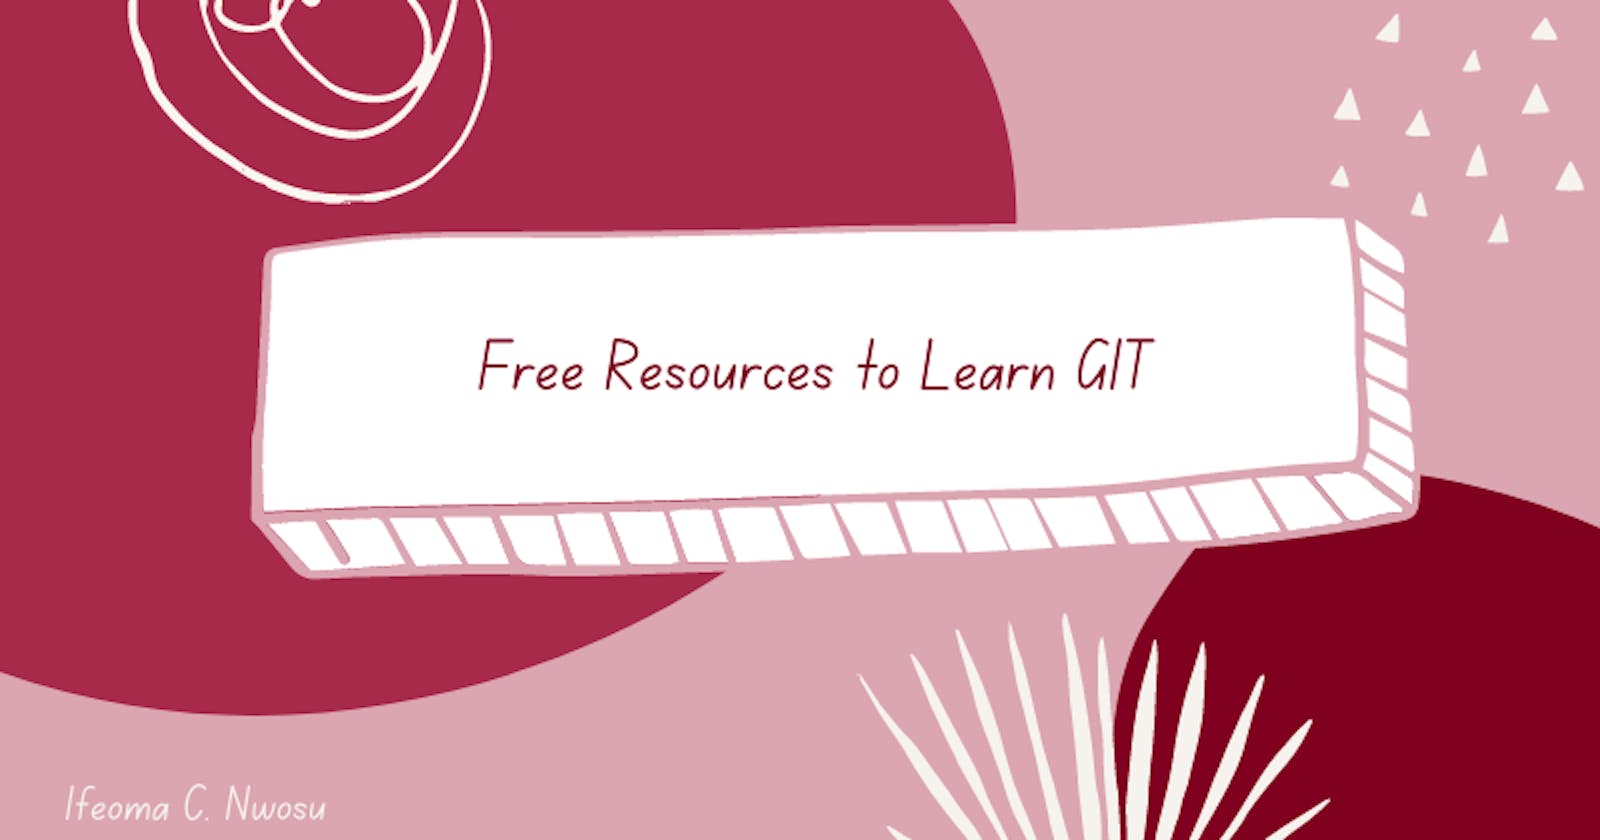 Go from Beginner to Pro at Git using these Free Resources